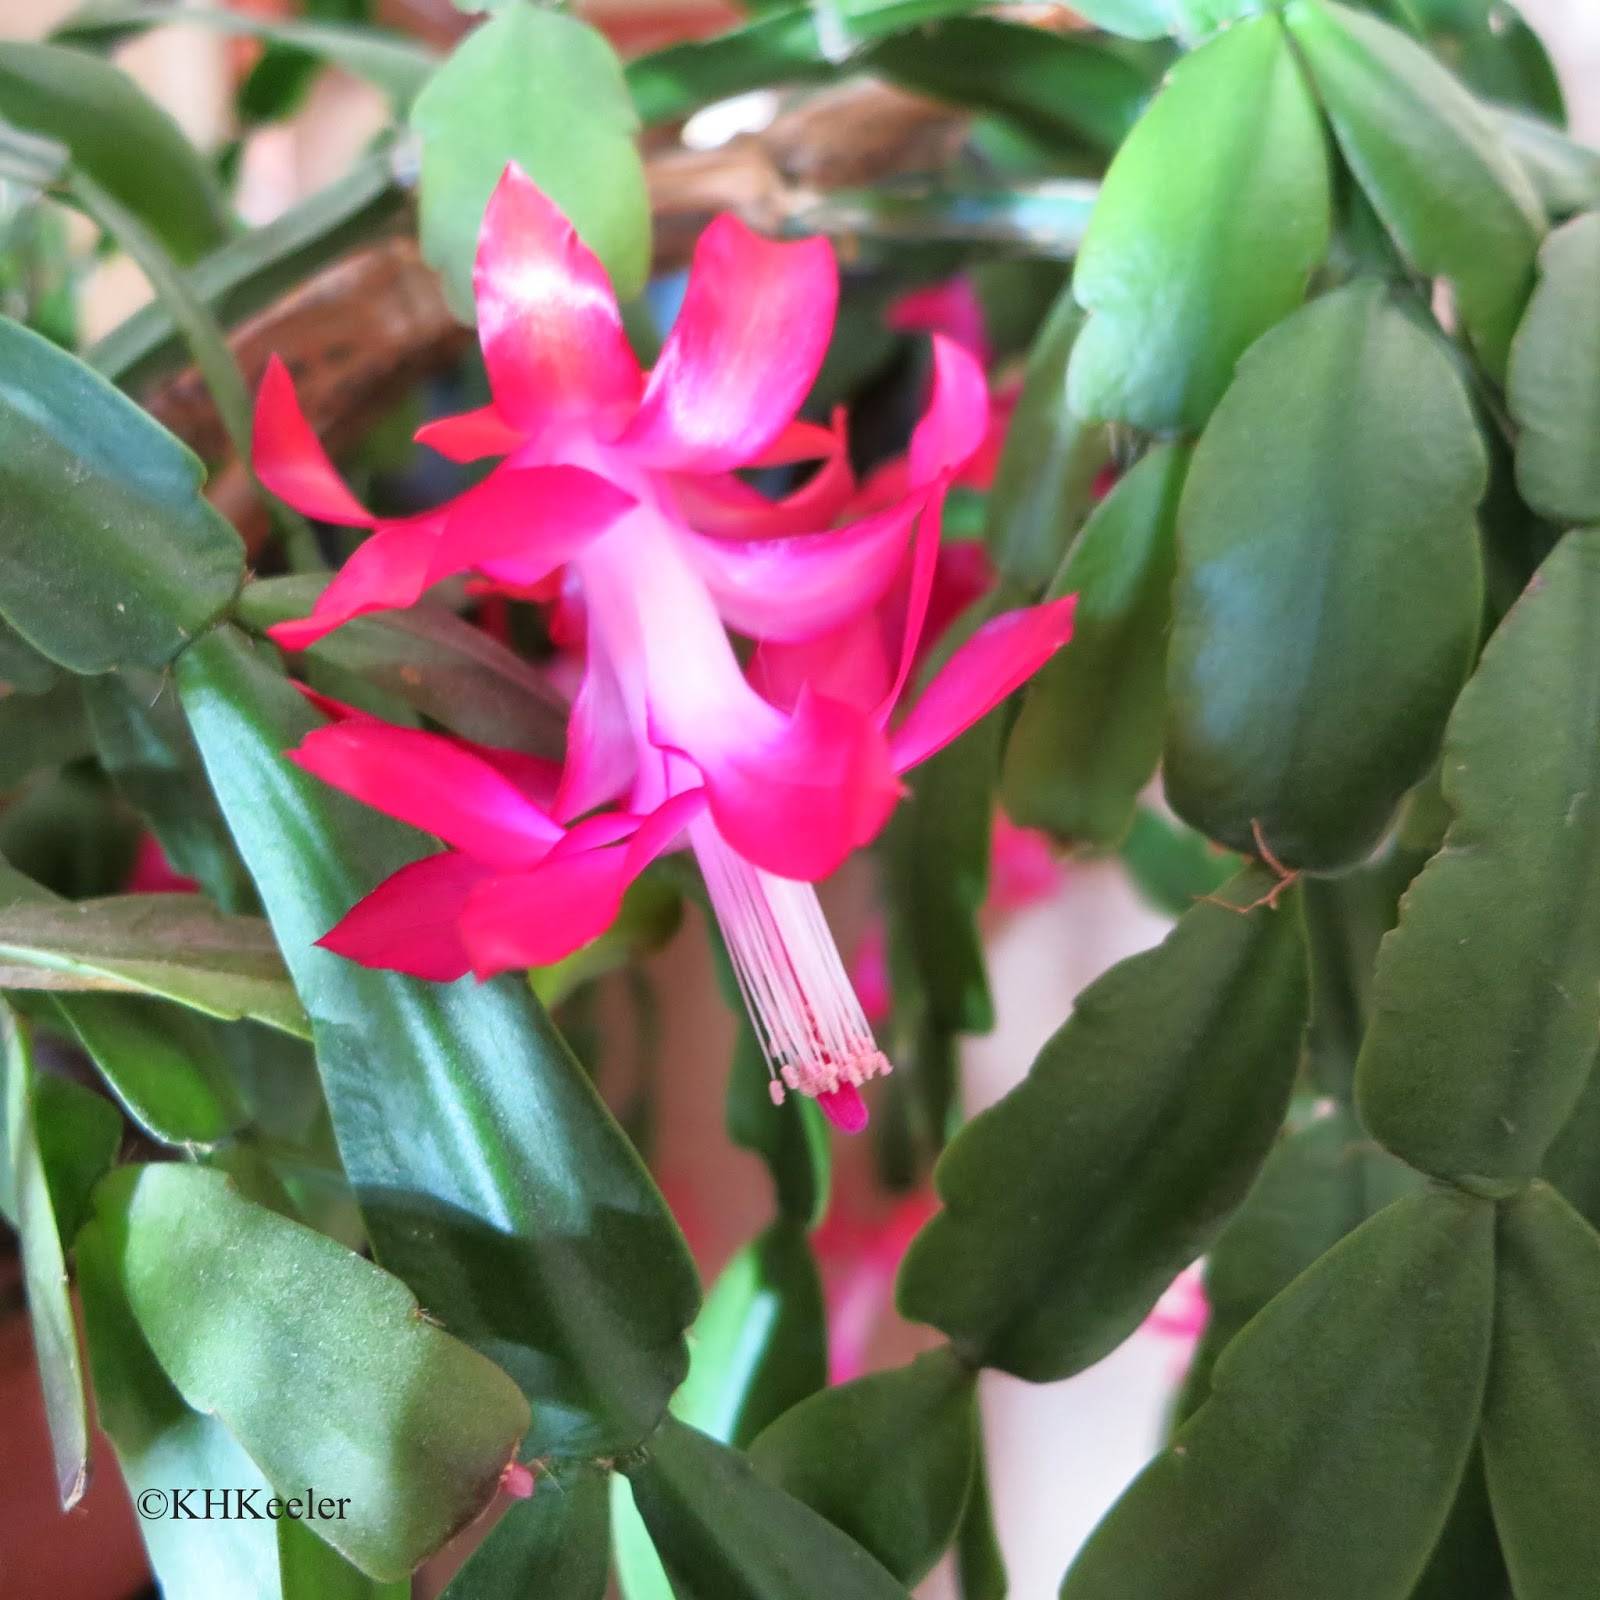 Christmas Cactus Flower
 A Wandering Botanist Growing a Happy Christmas Cactus